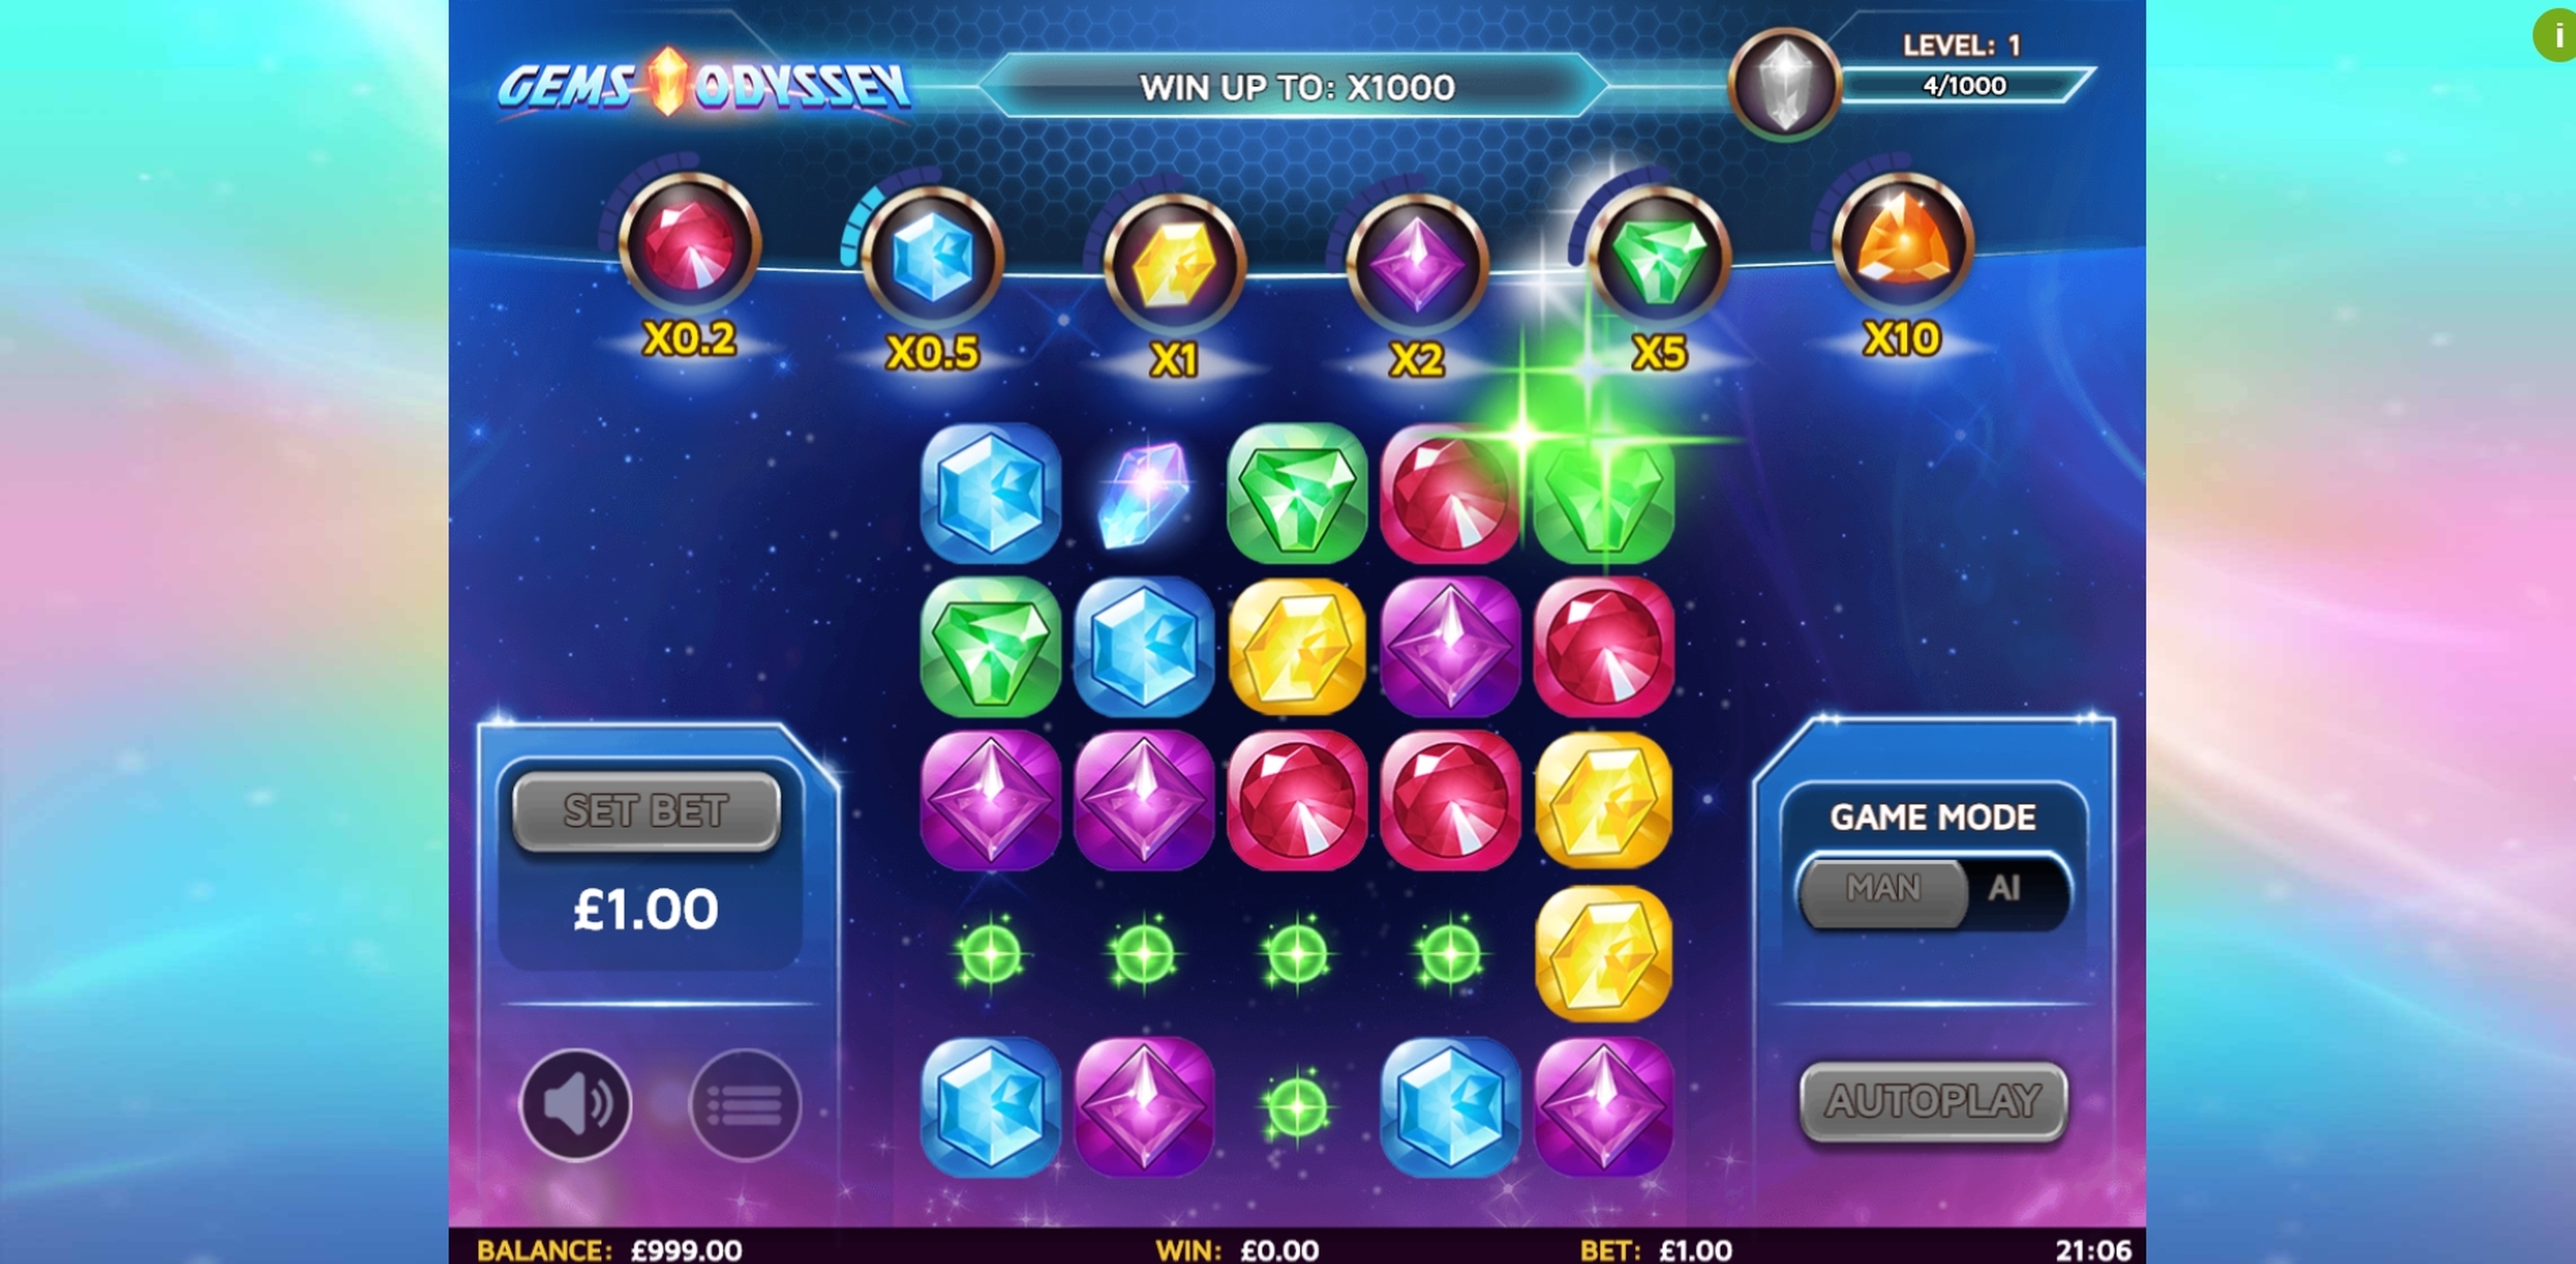 Win Money in Gems Odyssey Free Slot Game by Skillzzgaming